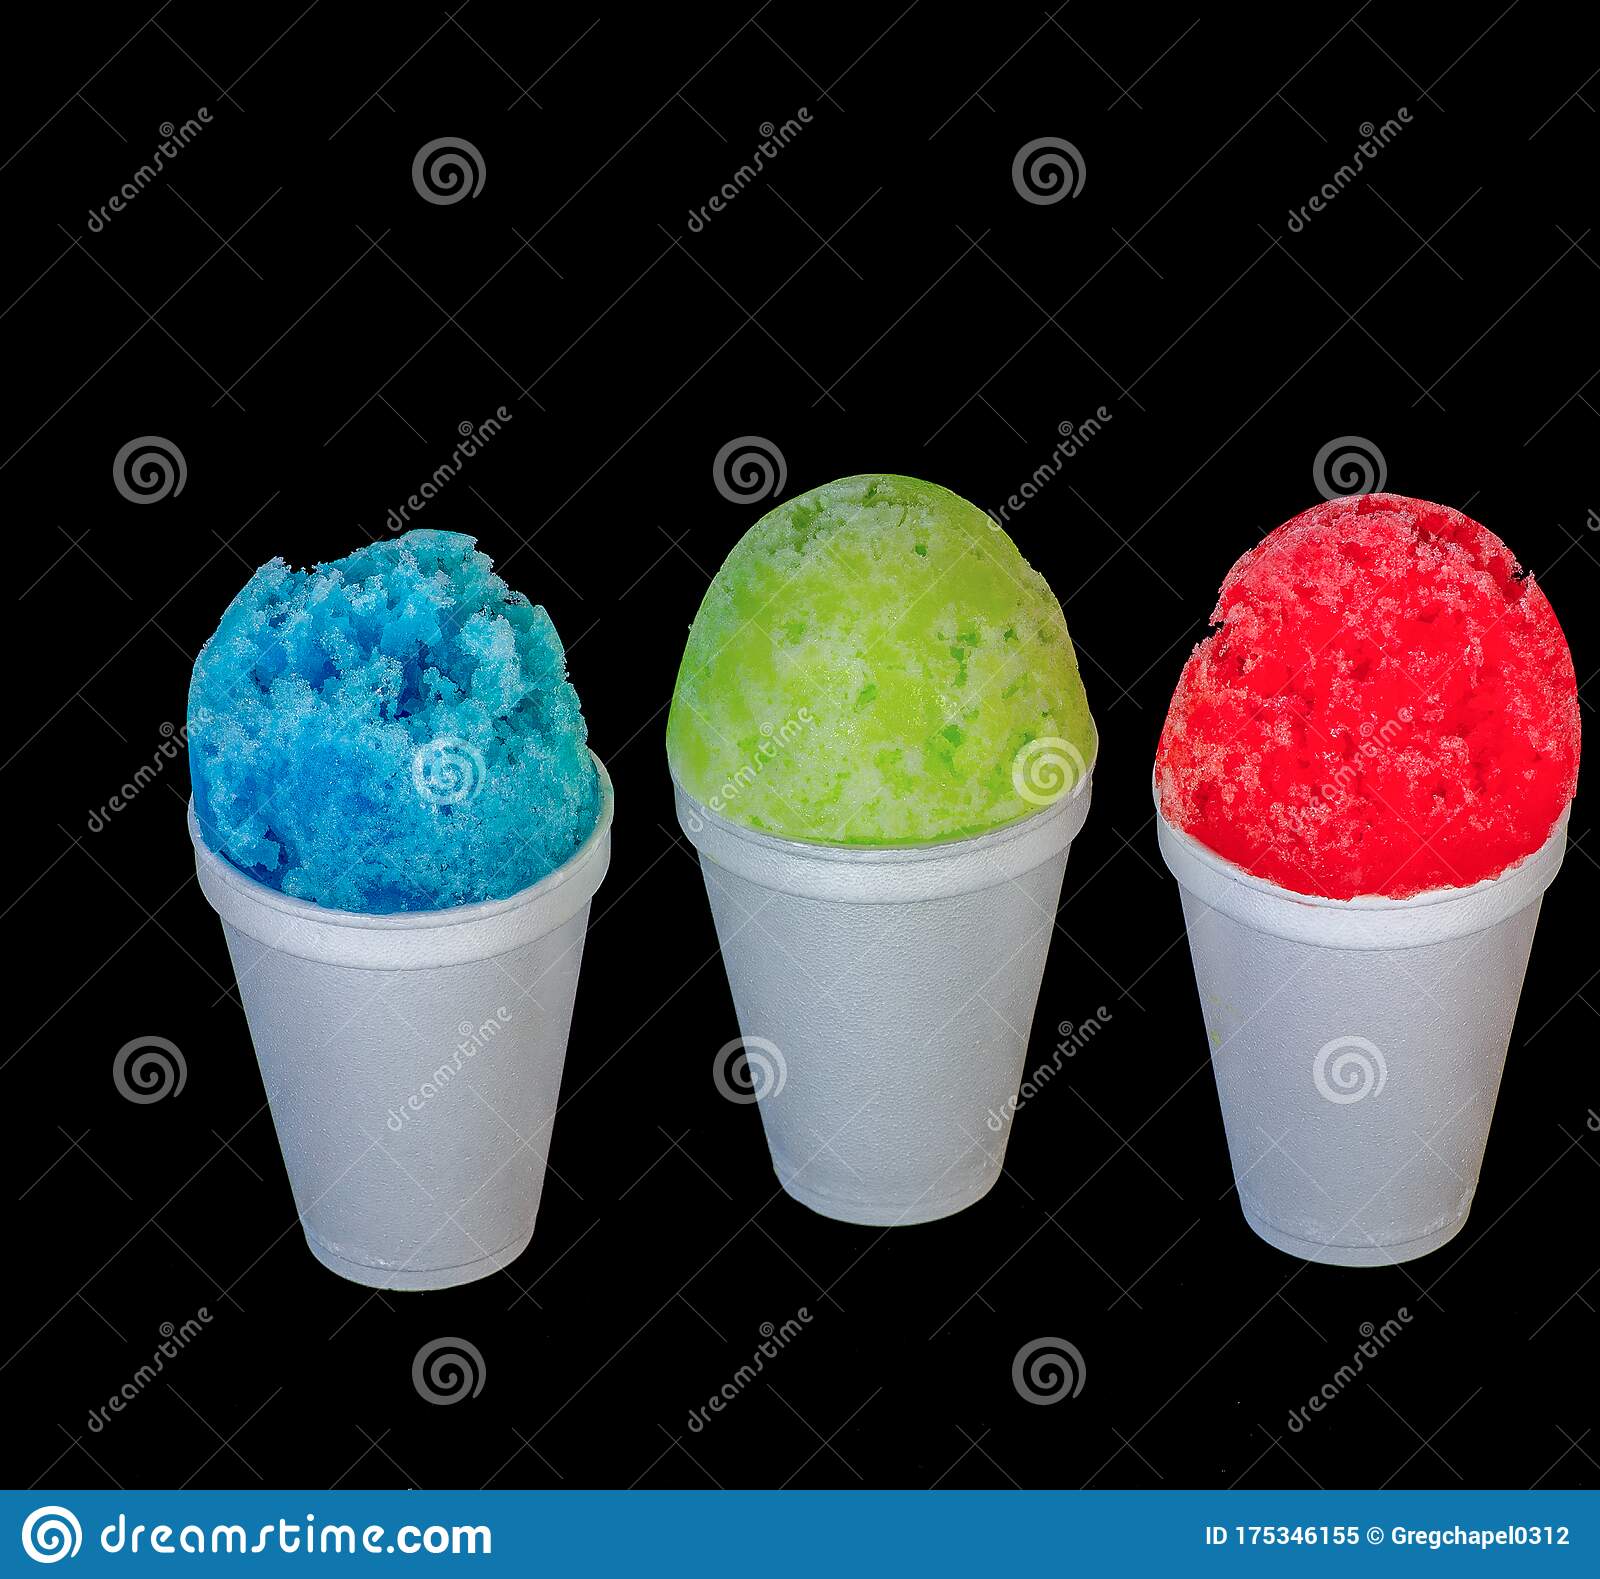 Download Snow Cone Images Free Nomer 5